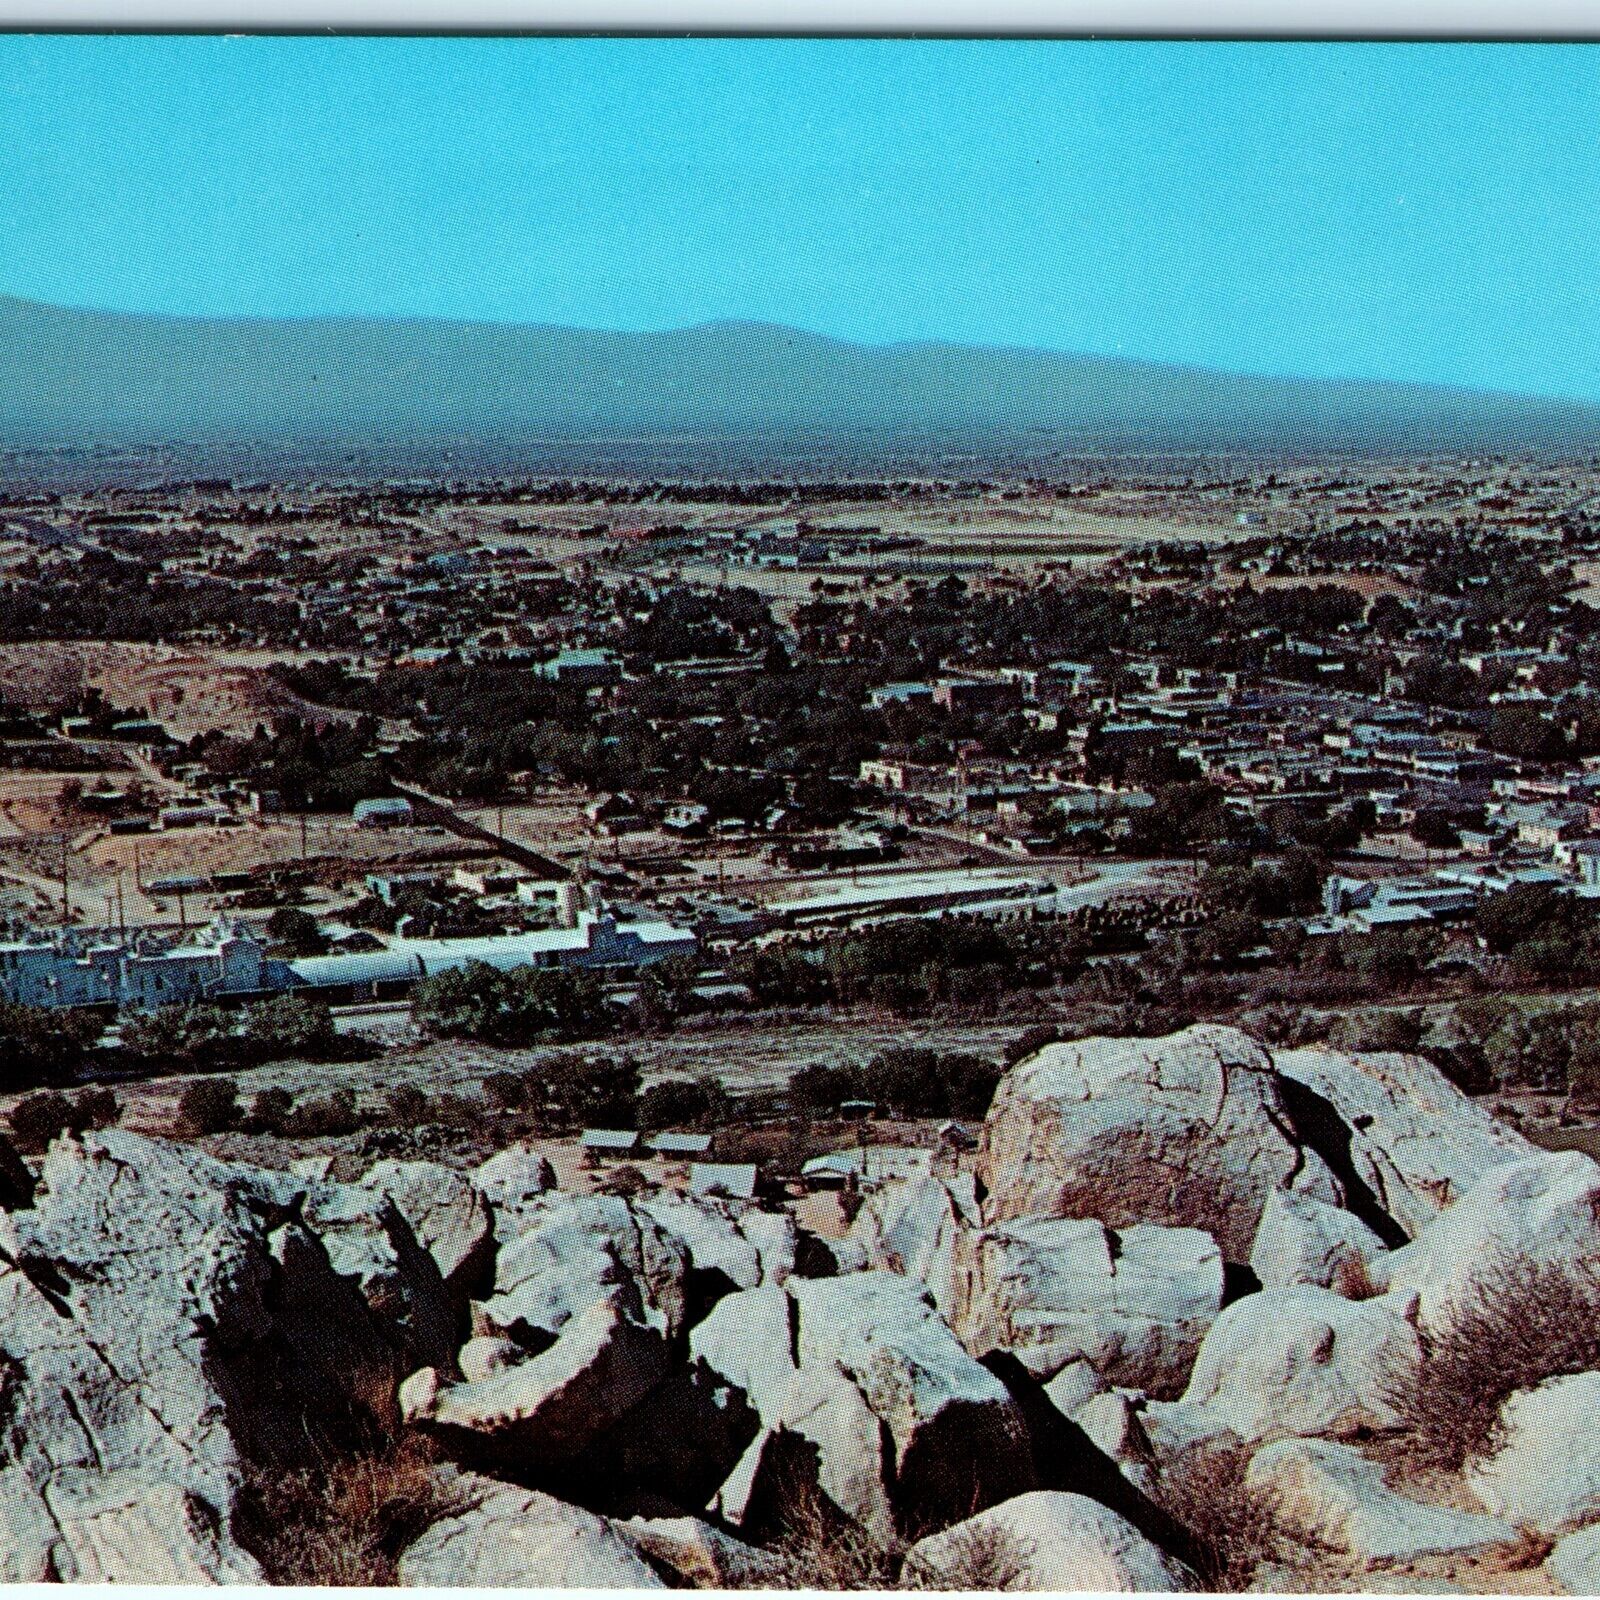 c1950s Victorville, CA Birds Eye Chrome Photo Postcard Store Melted Rocks A90